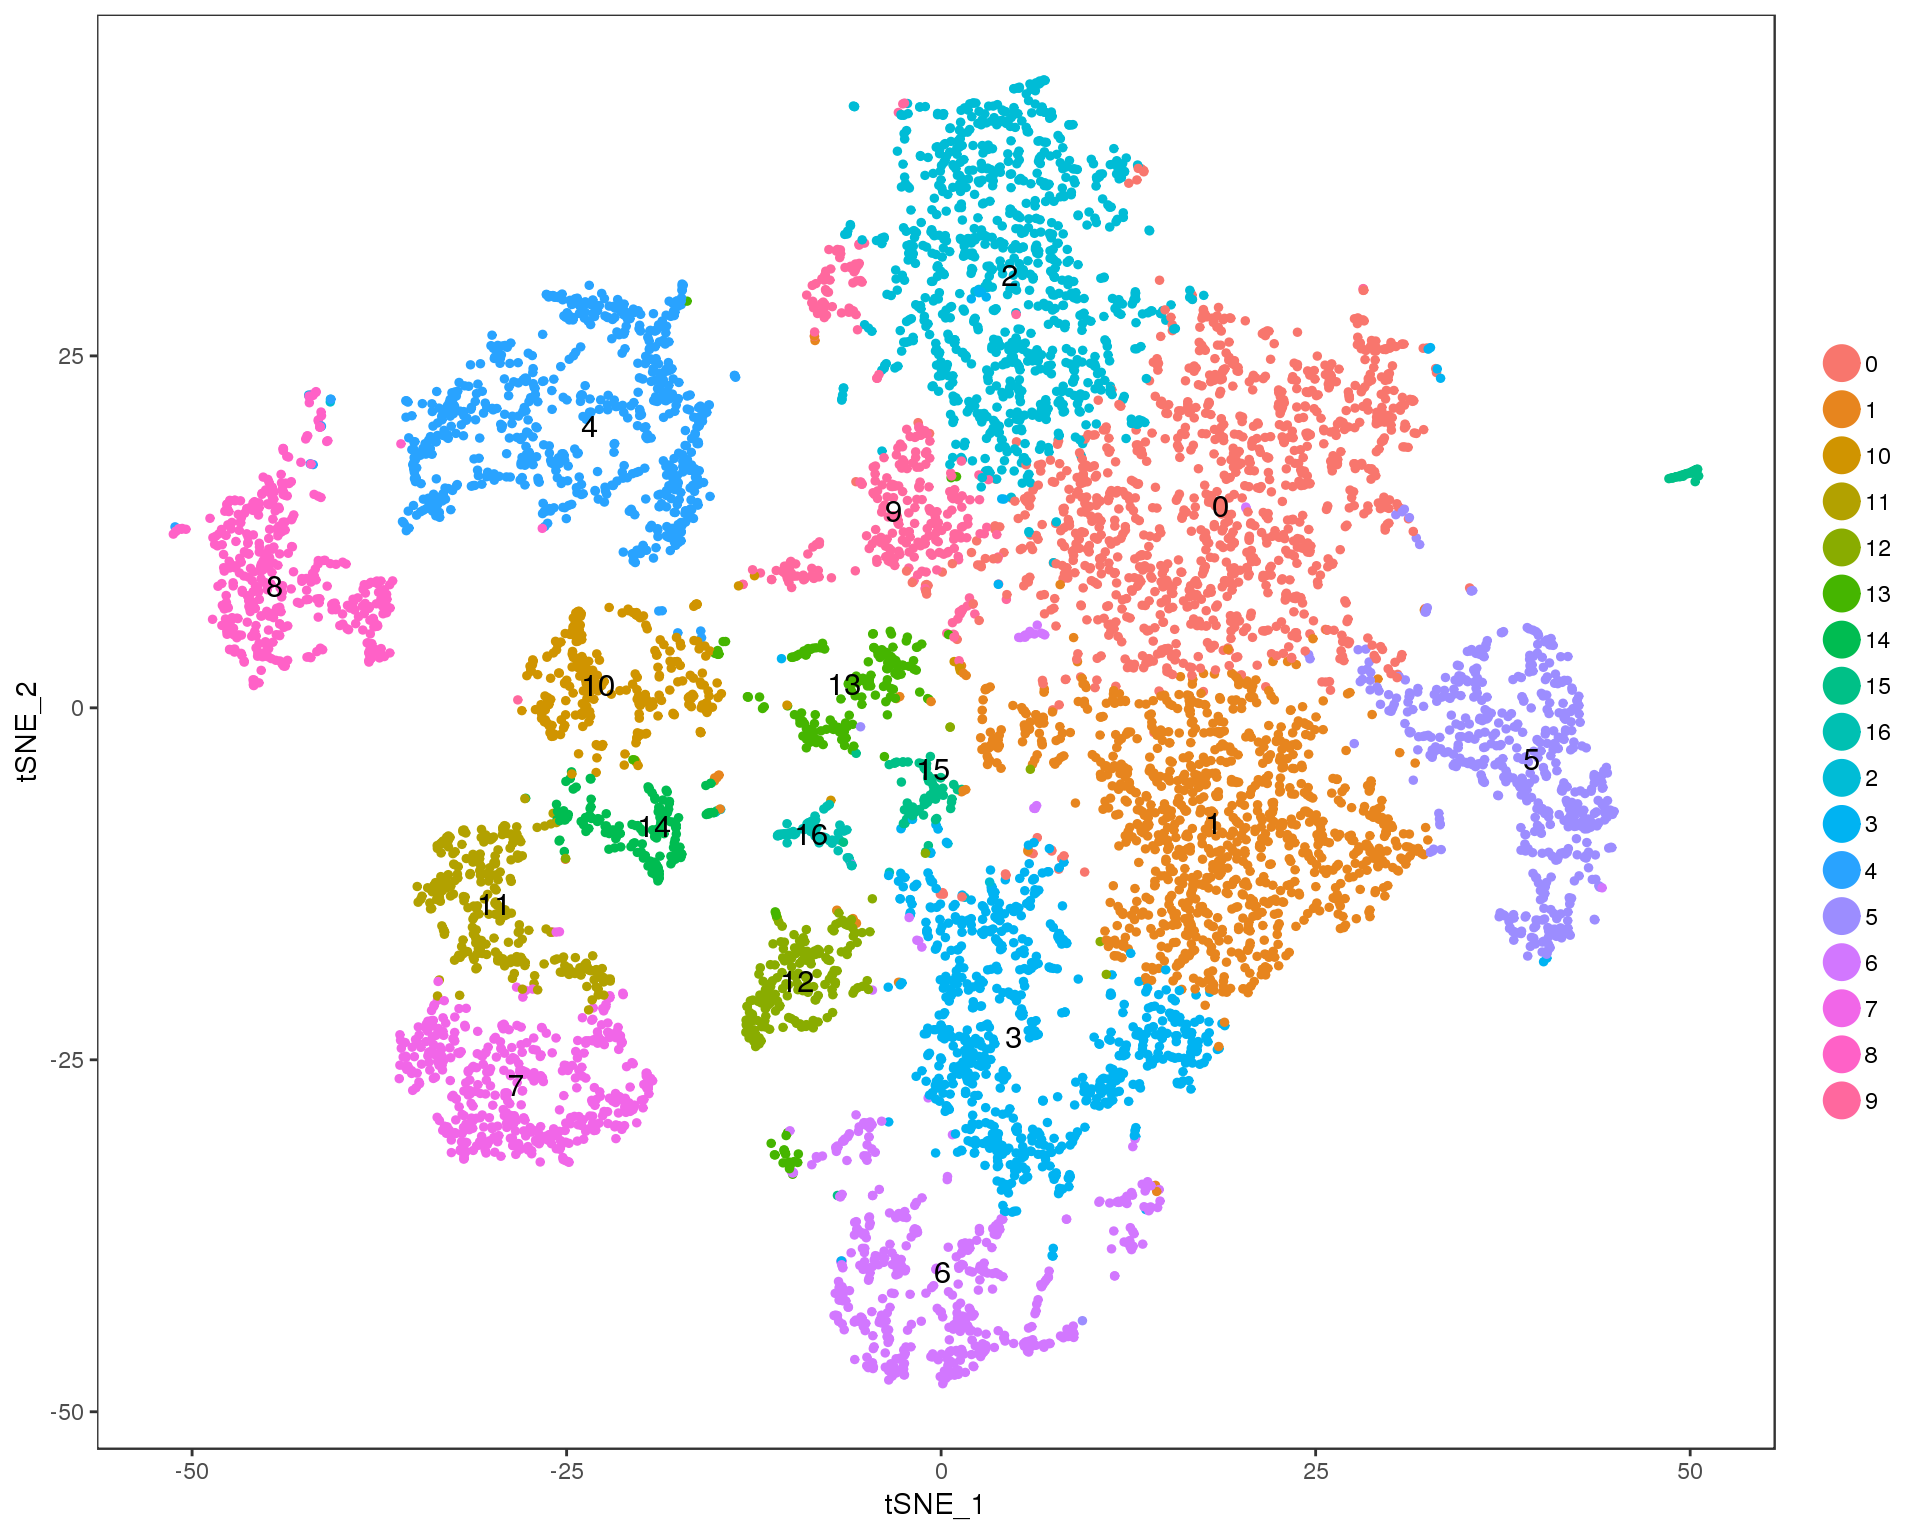 res-tSNE-0.7-1.png